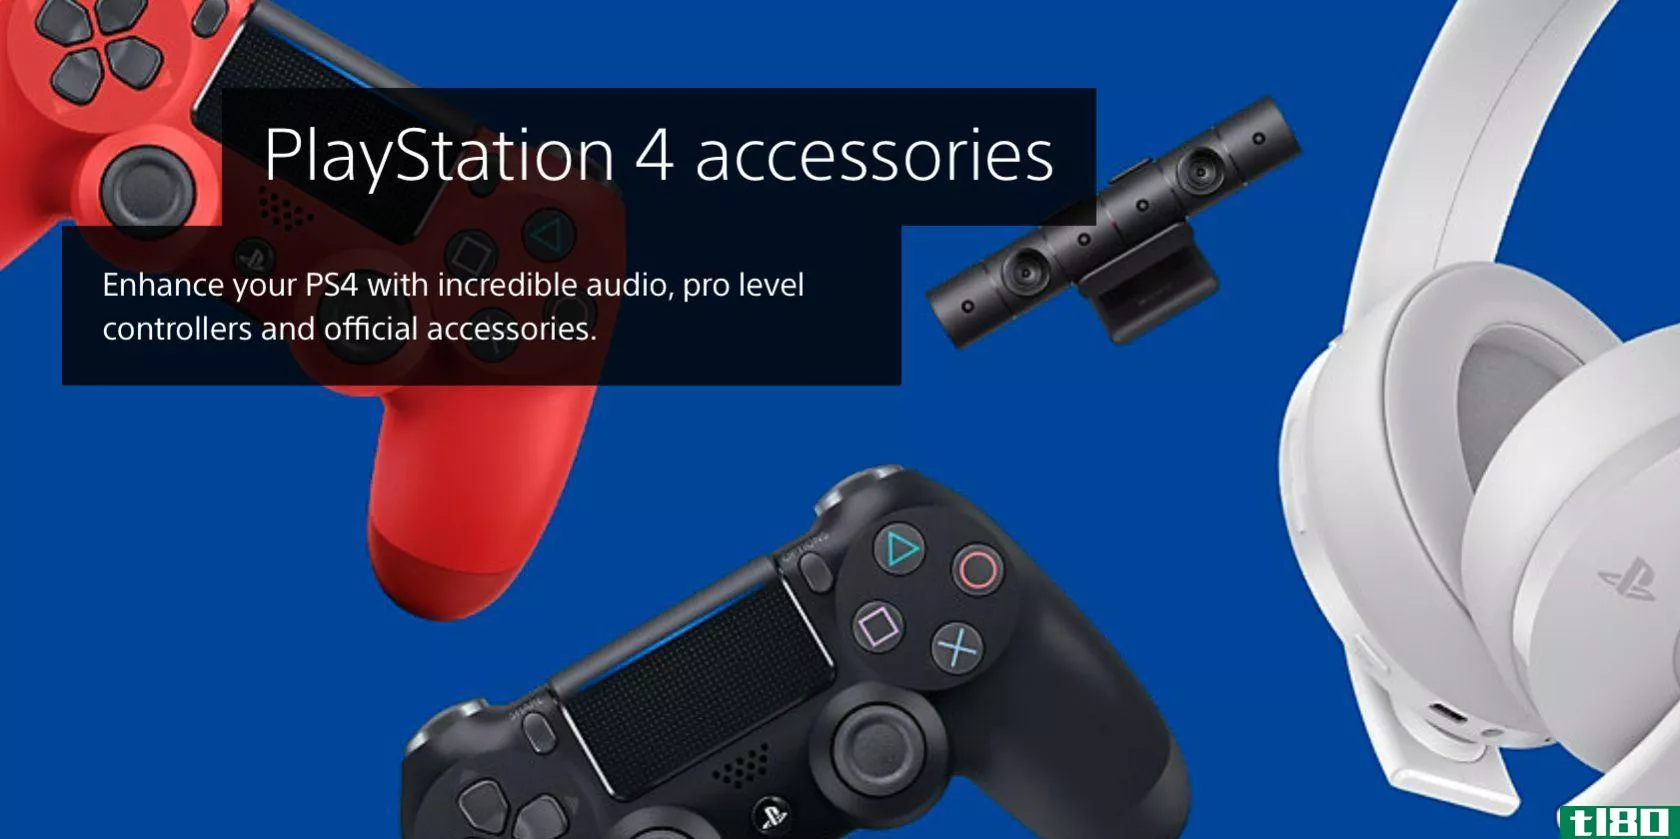 PS4 accessories image from PlayStation website